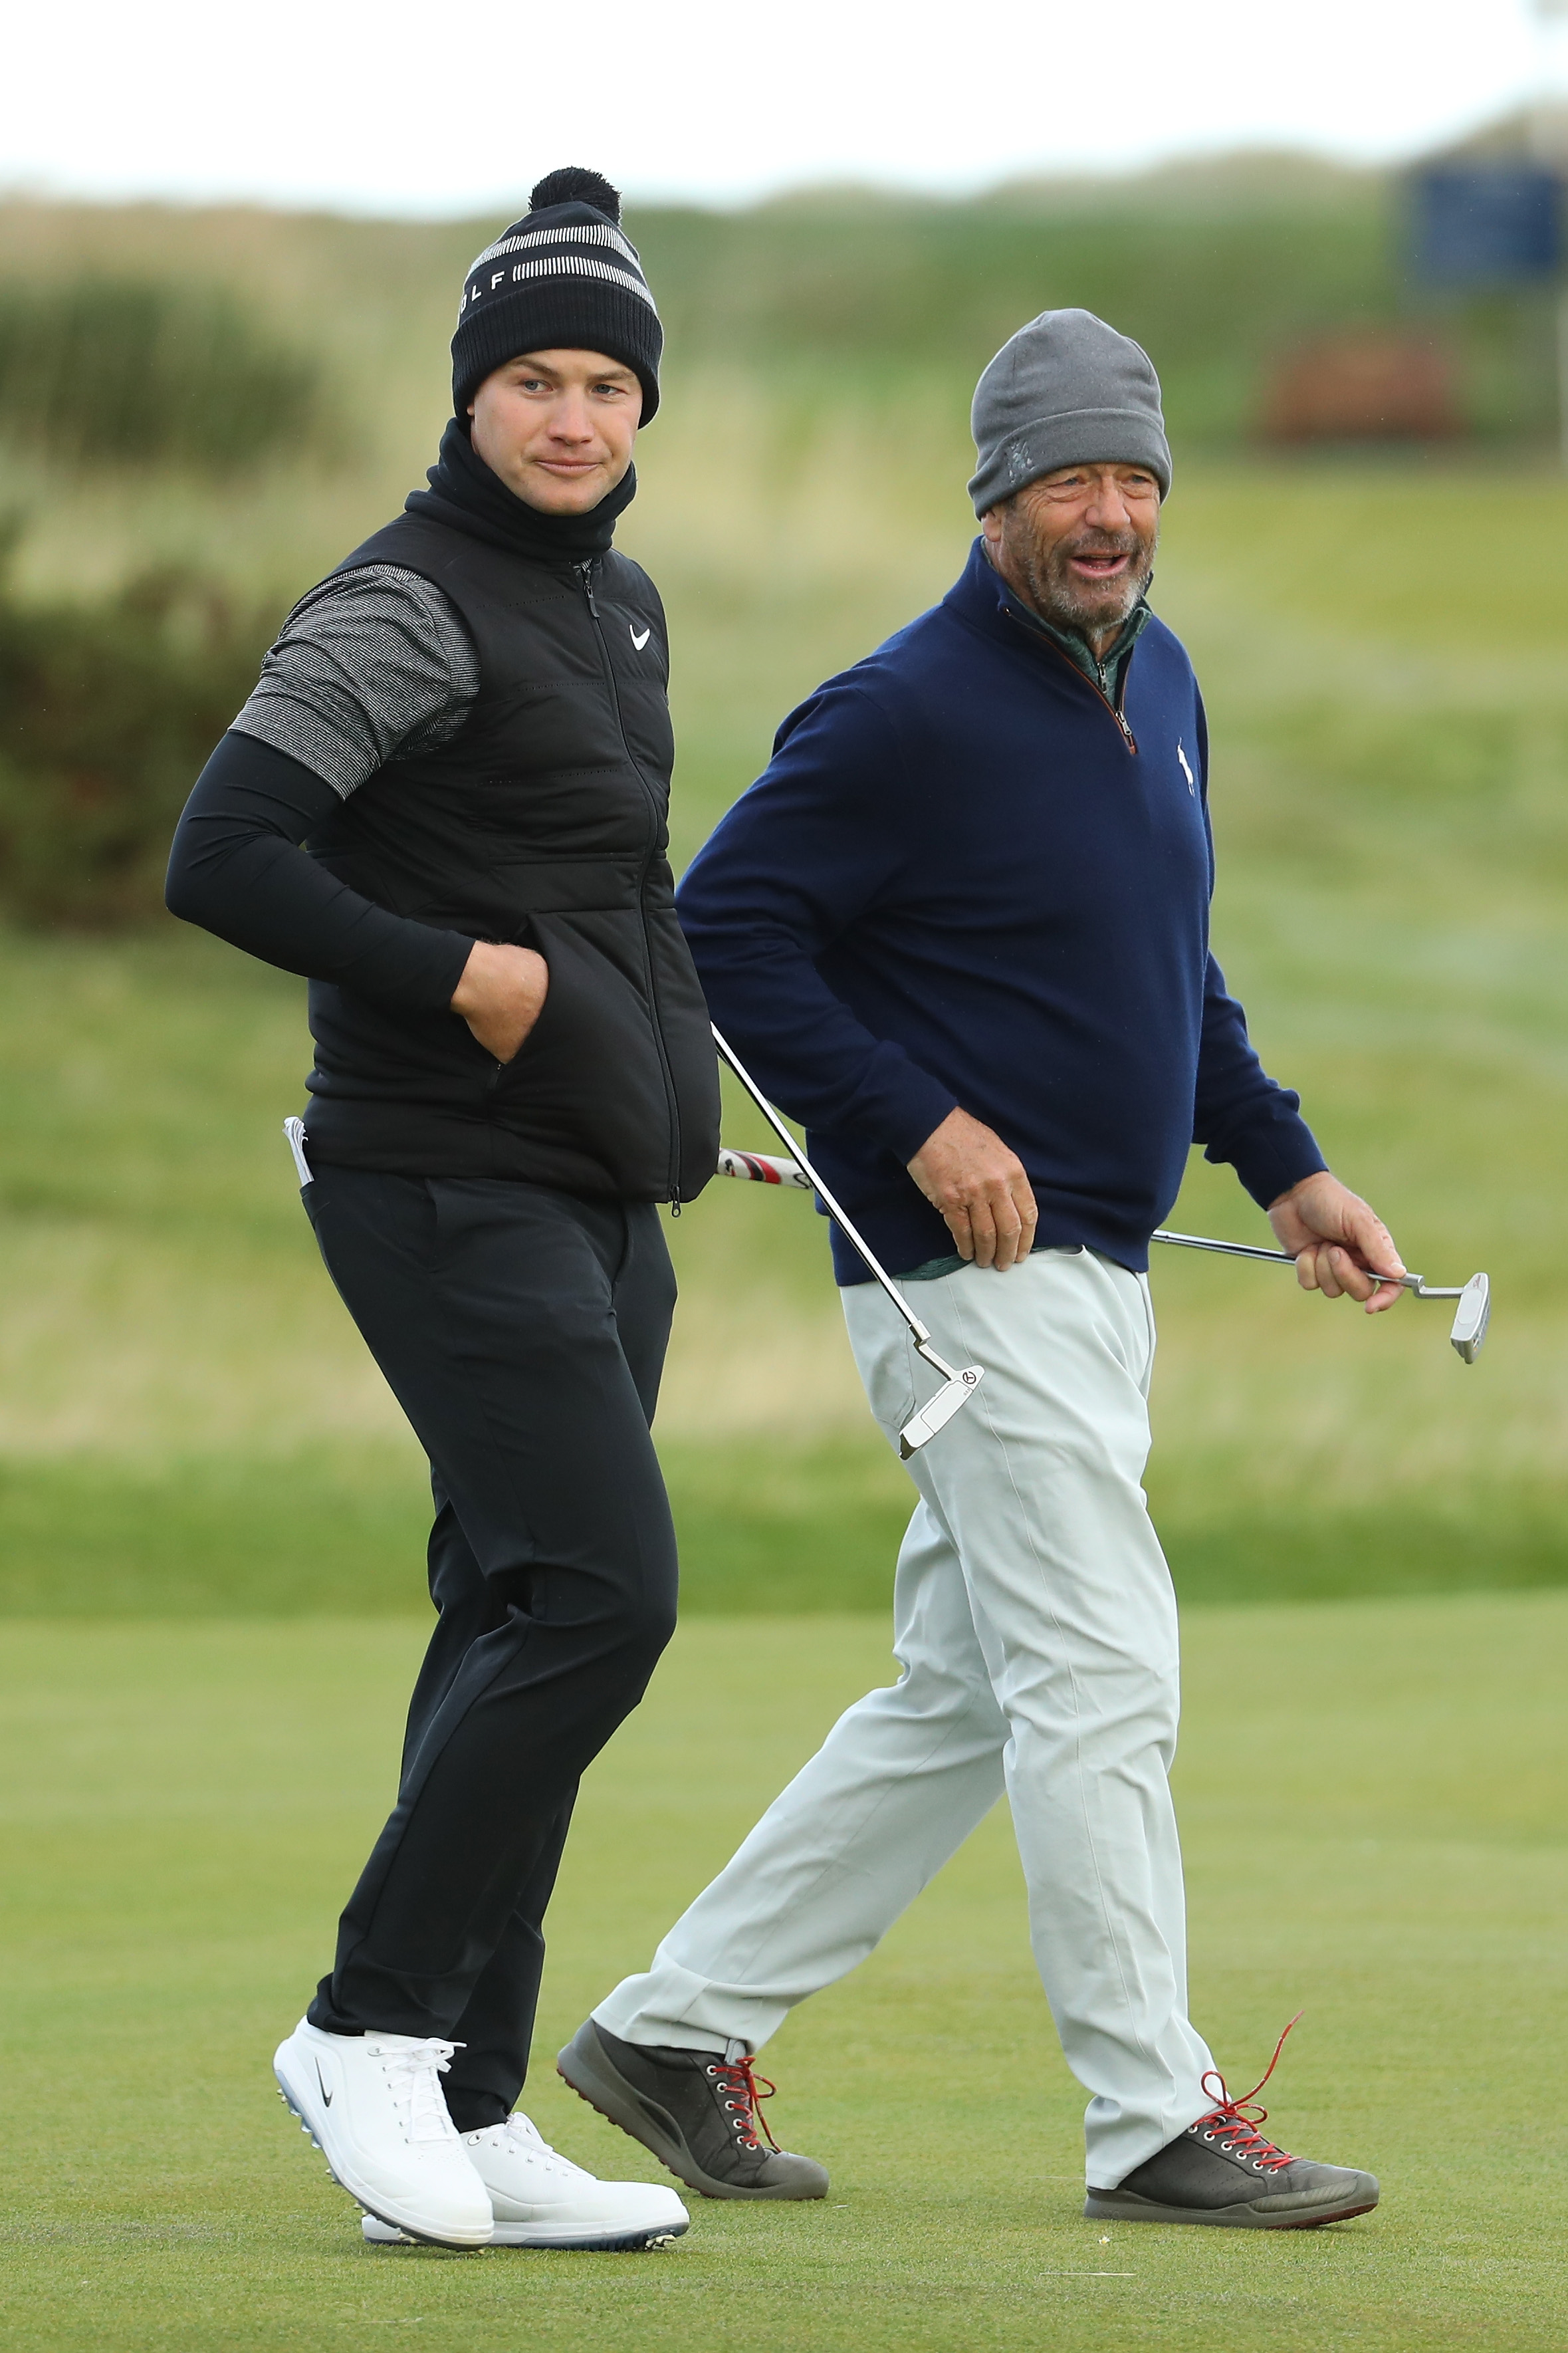 The rock icon and Oliver Fisher at the 2018 Alfred Dunhill Links Championship on October 4 in St Andrews, Scotland. | Source: Getty Images